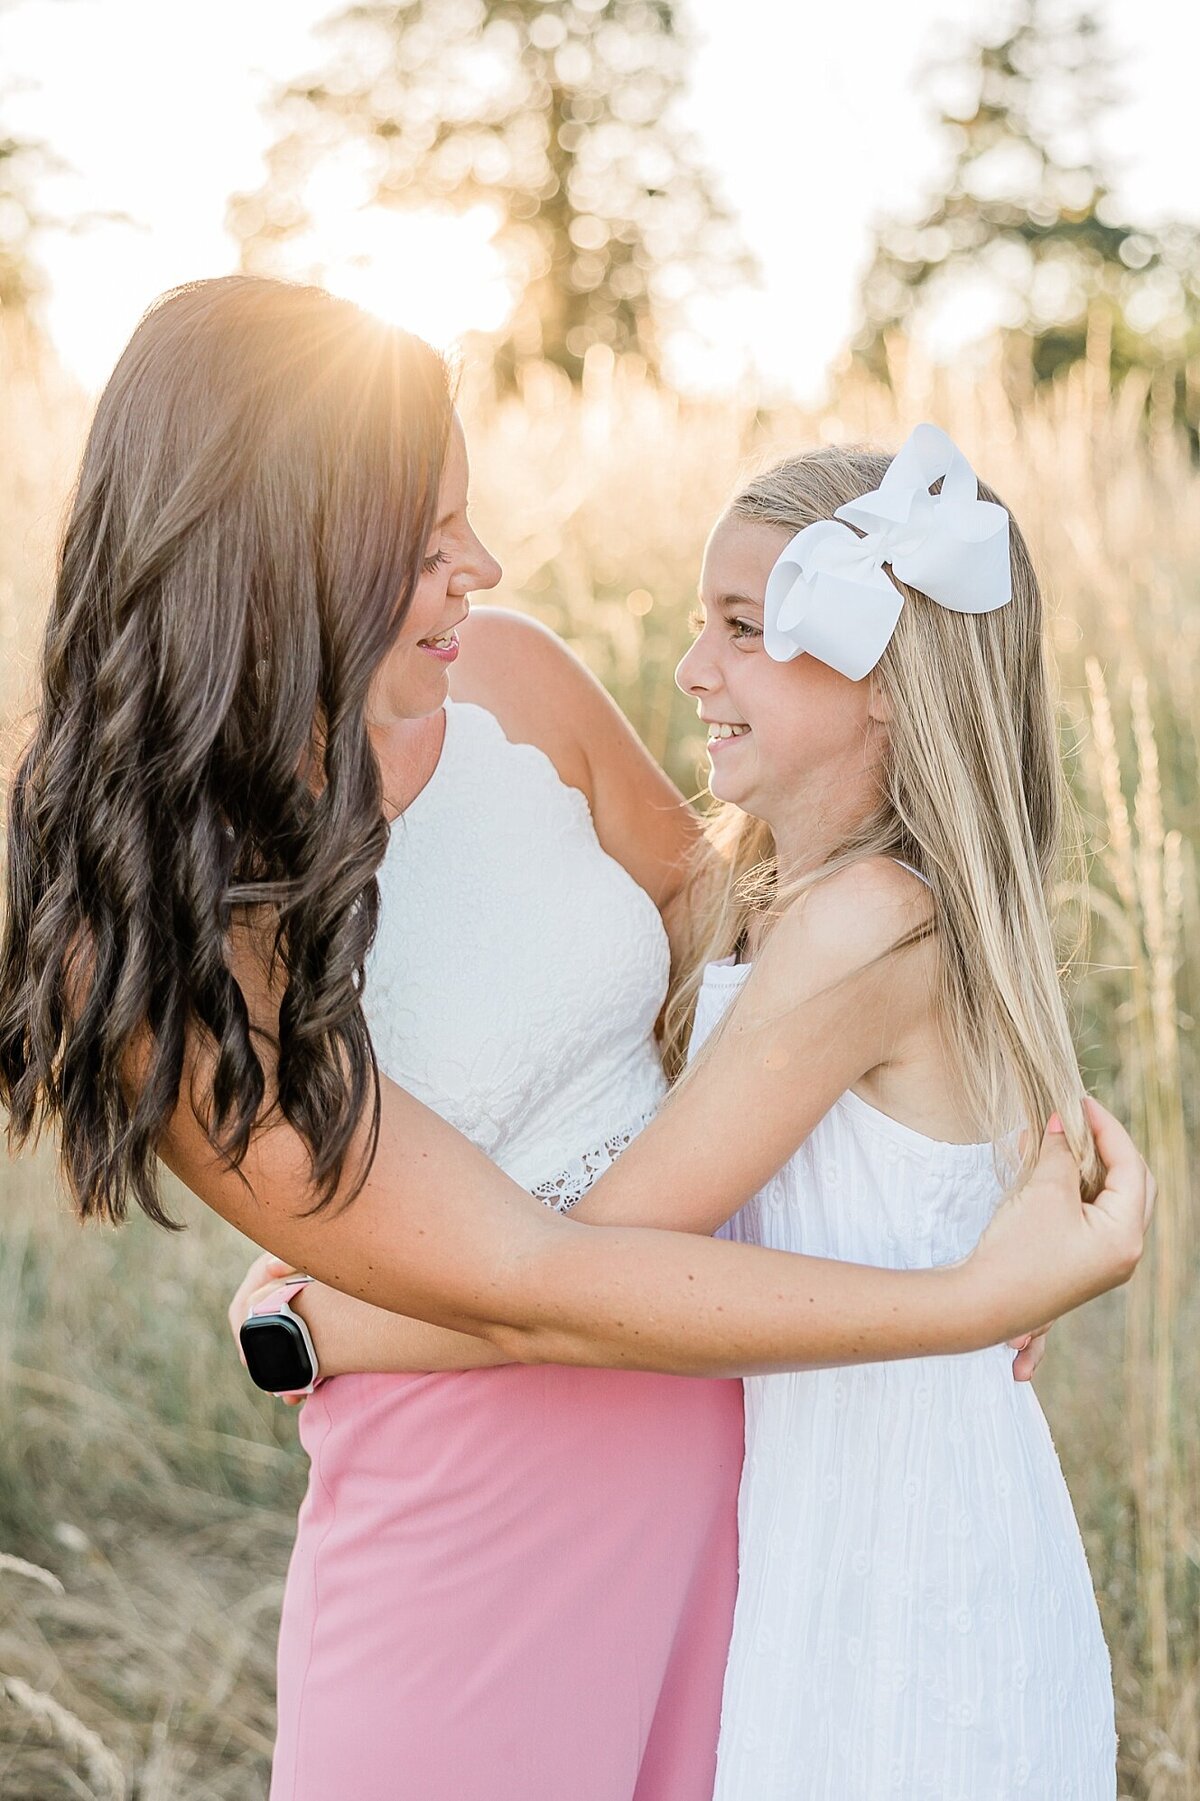 Mom and daughter hugging at sunset